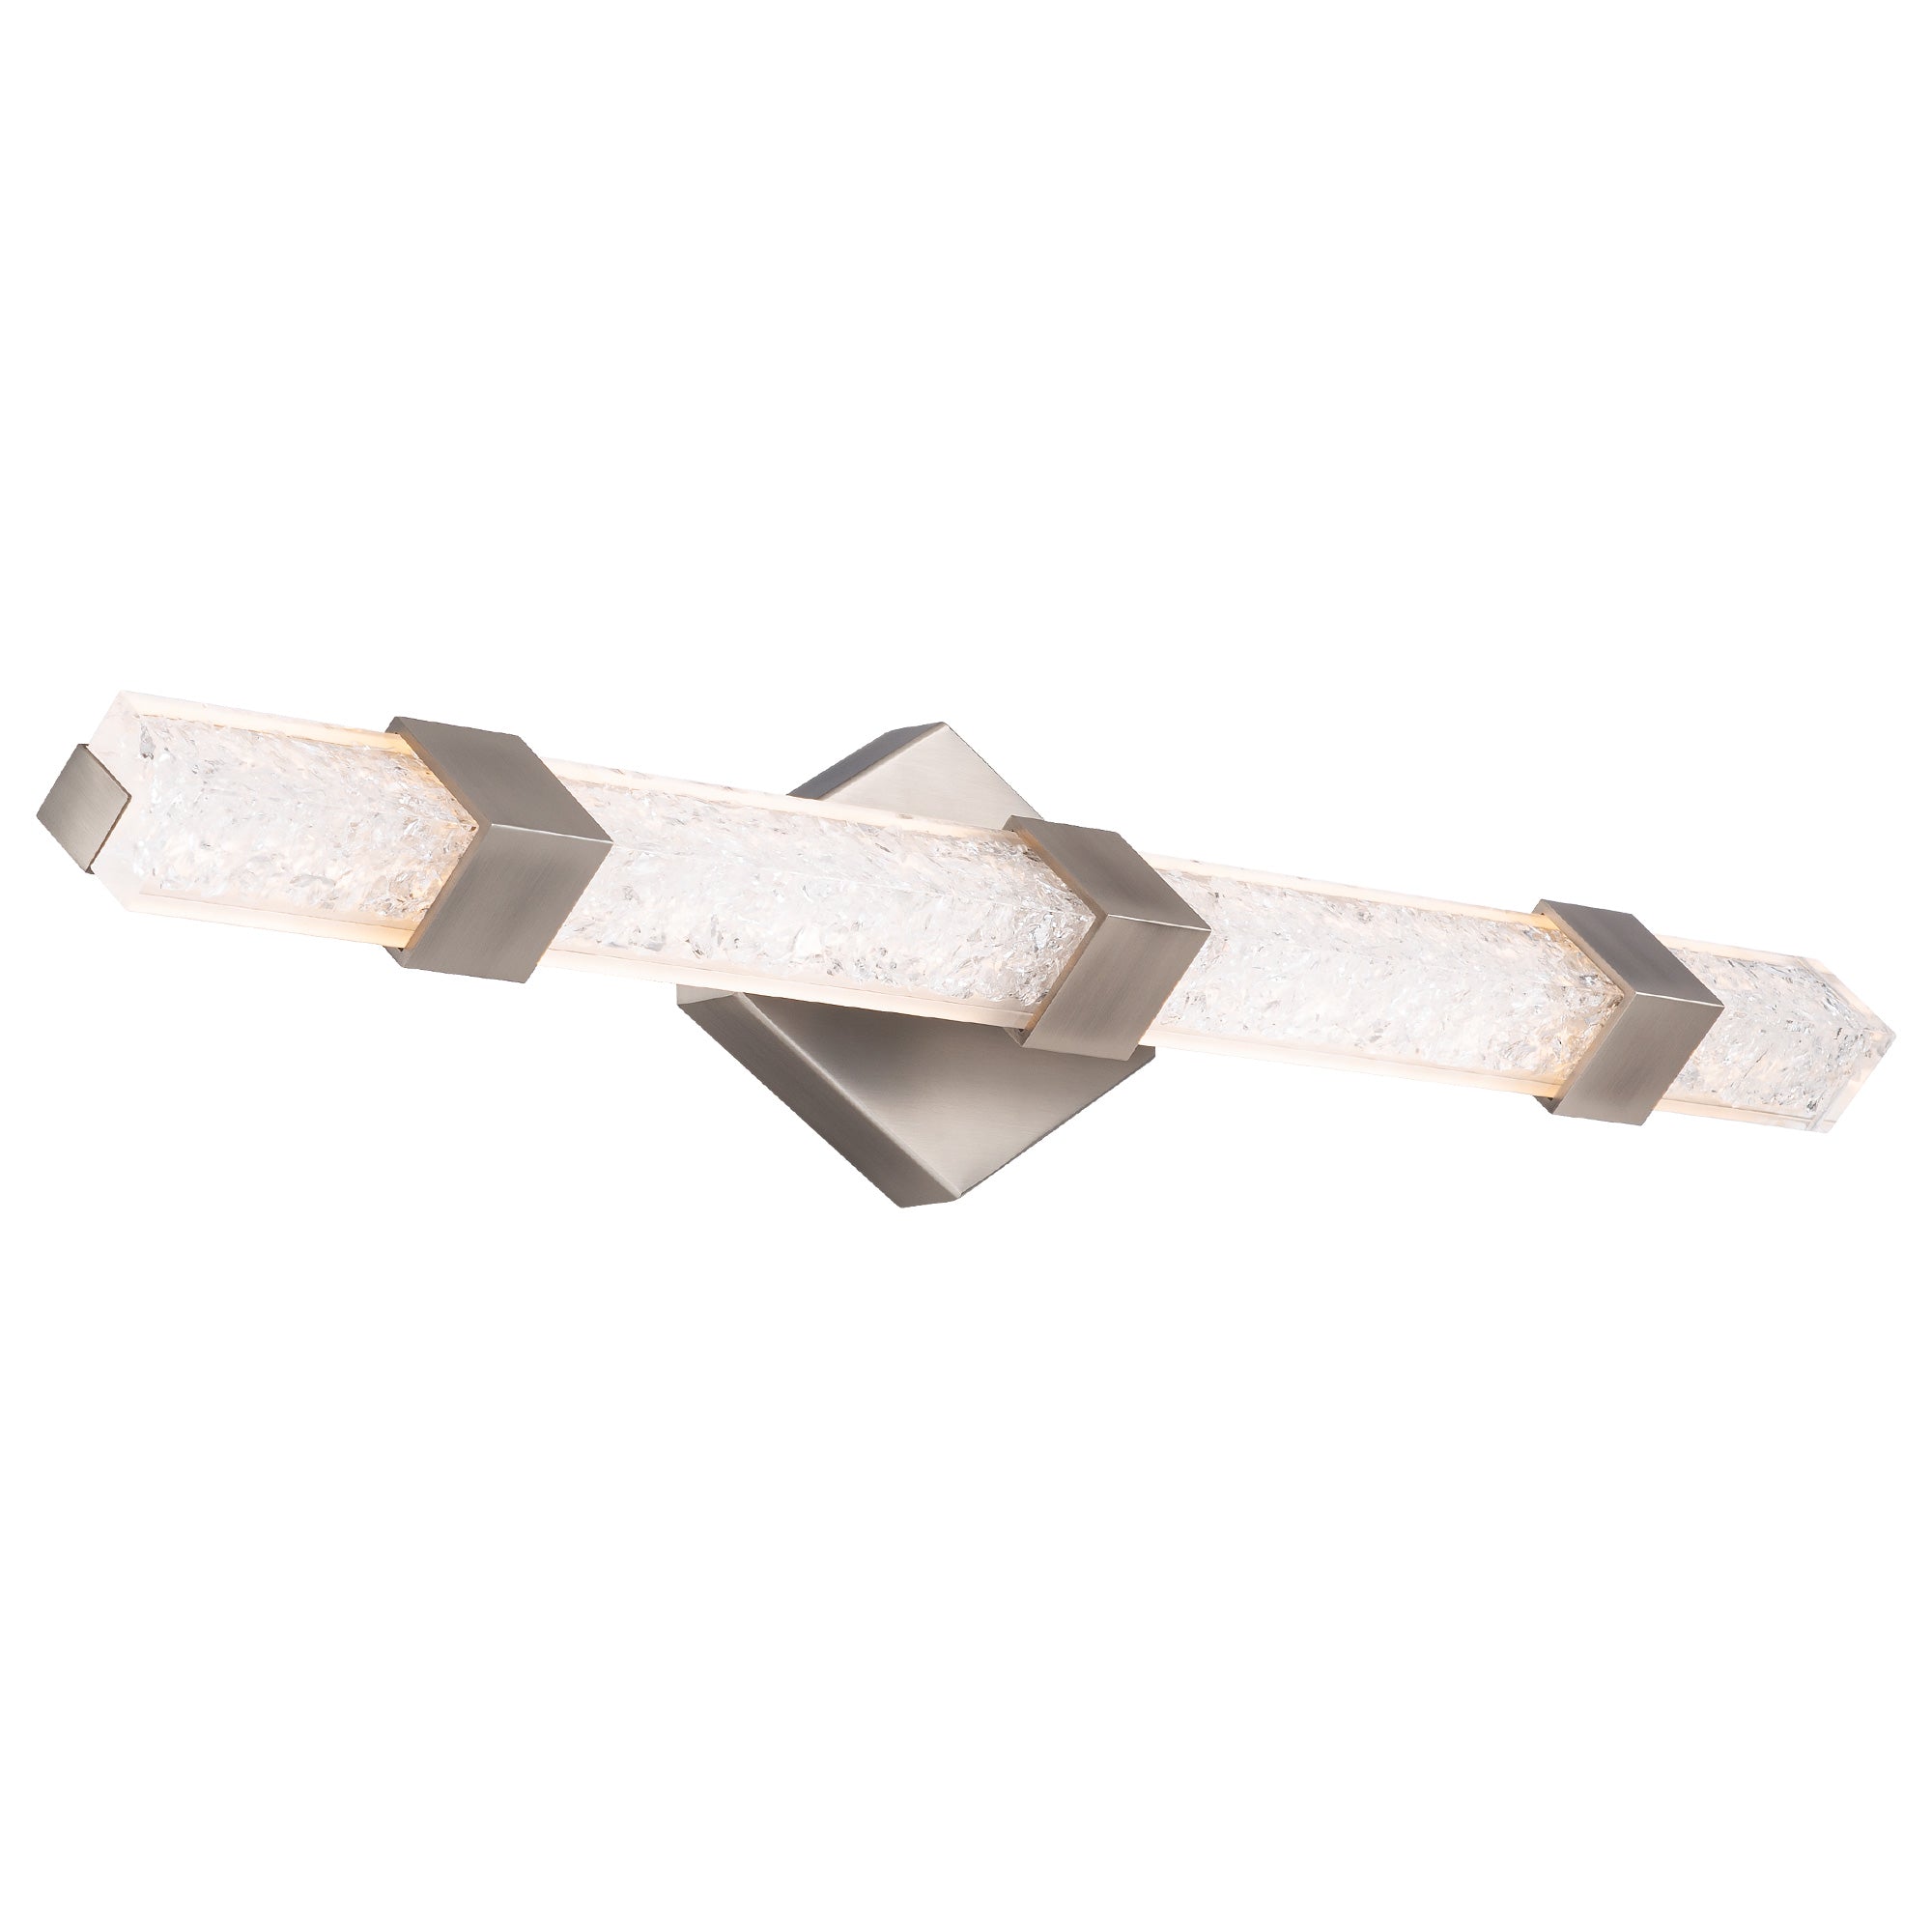 REGAL Bathroom sconce Nickel INTEGRATED LED - WS-46128-BN | MODERN FORMS